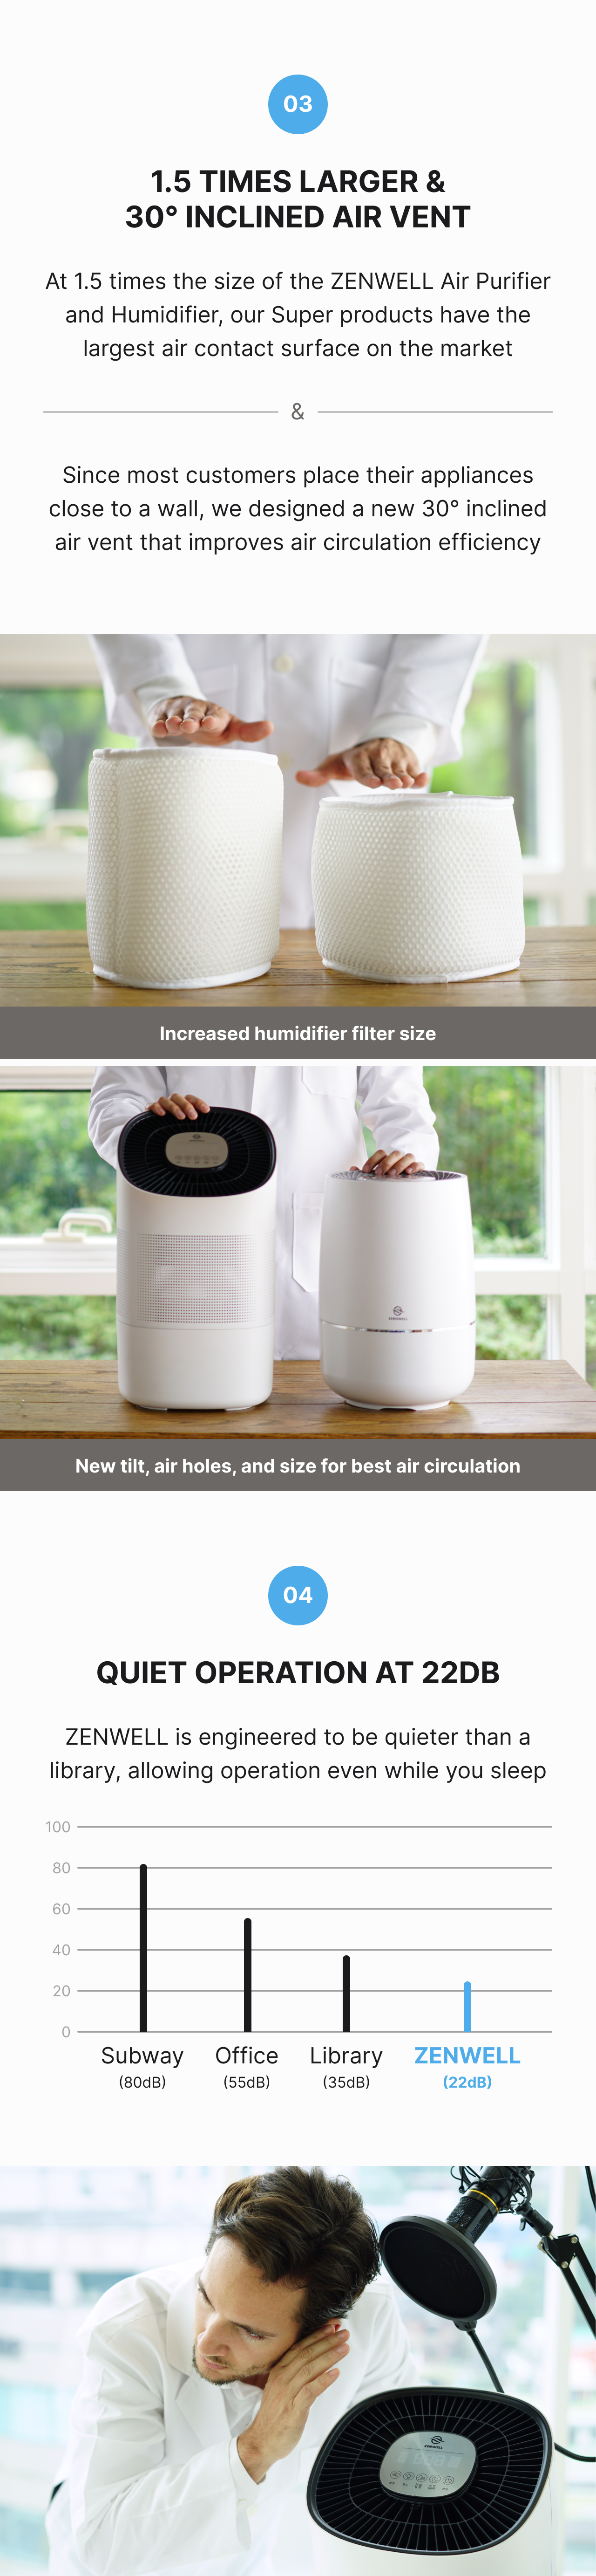 Super Humidifier product description image describing how this unit and its filter are 1.5 times larger than the regular humidifier and this unit has a 30 degree inlined vent that better circulates air while sitting next to a wall, where people normally keep their devices. The operation is at the same low 22 decibles, quieter than a library.